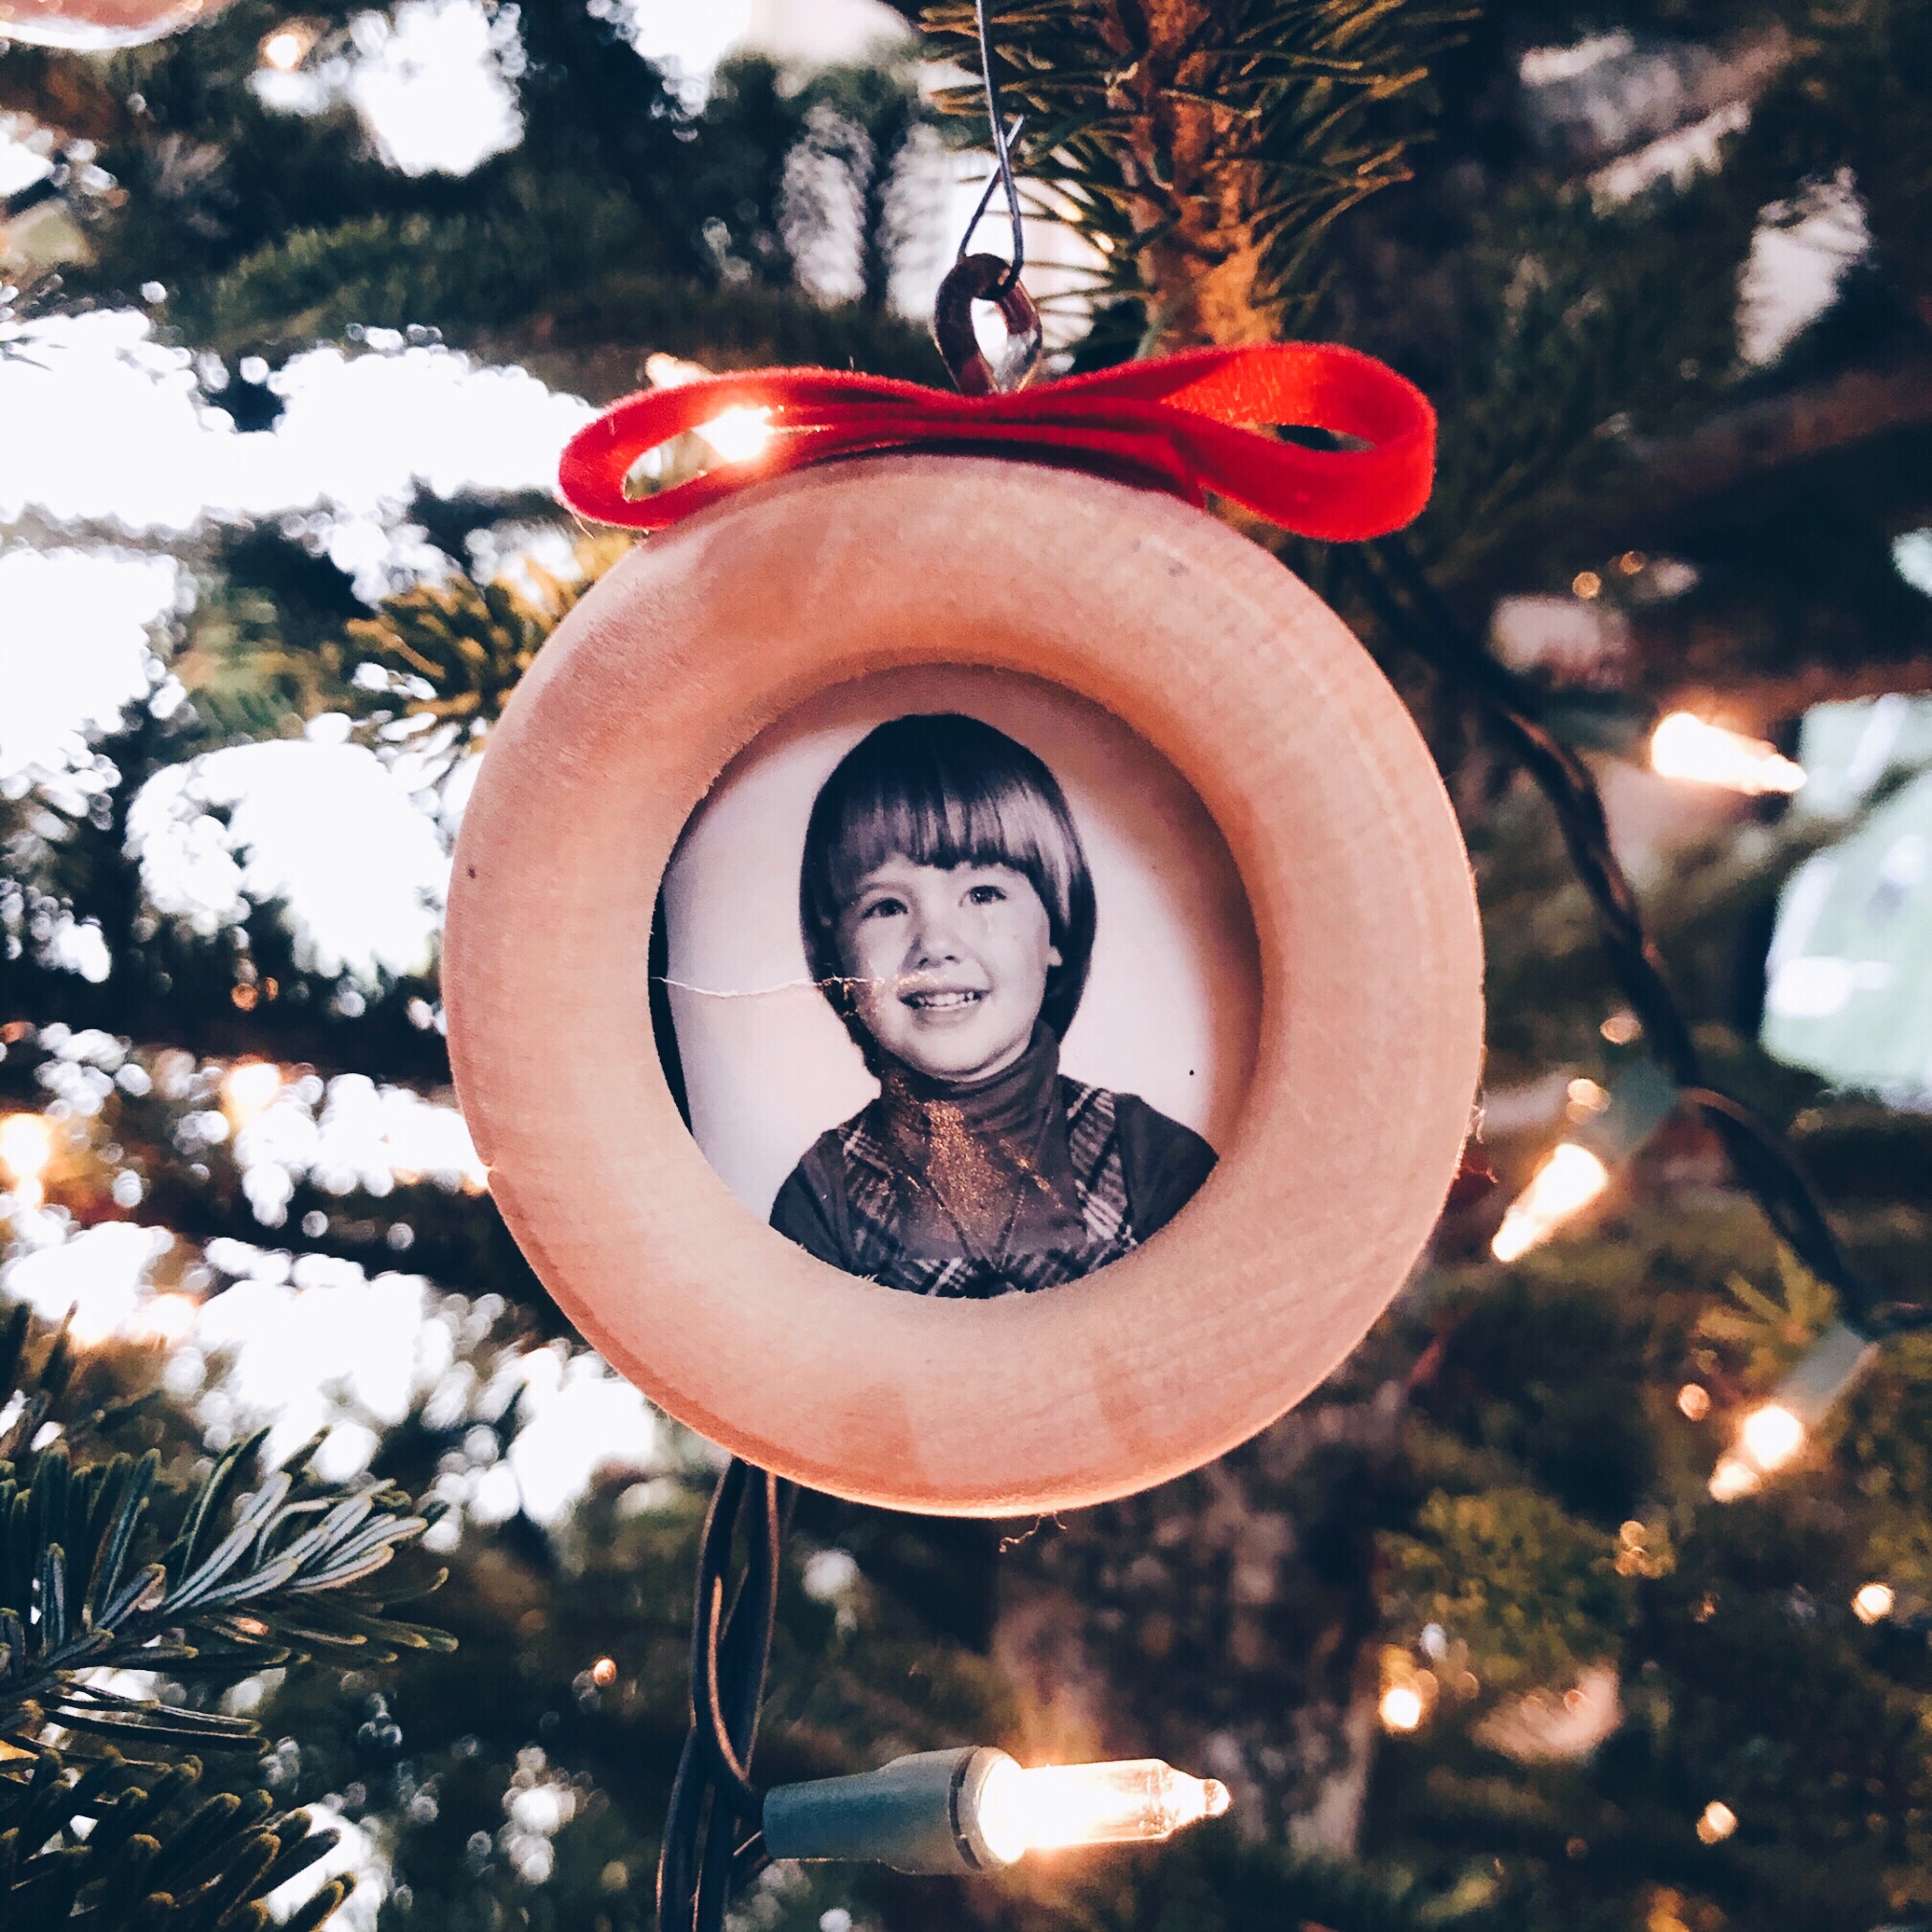 A photo hanged on the Christmas tree